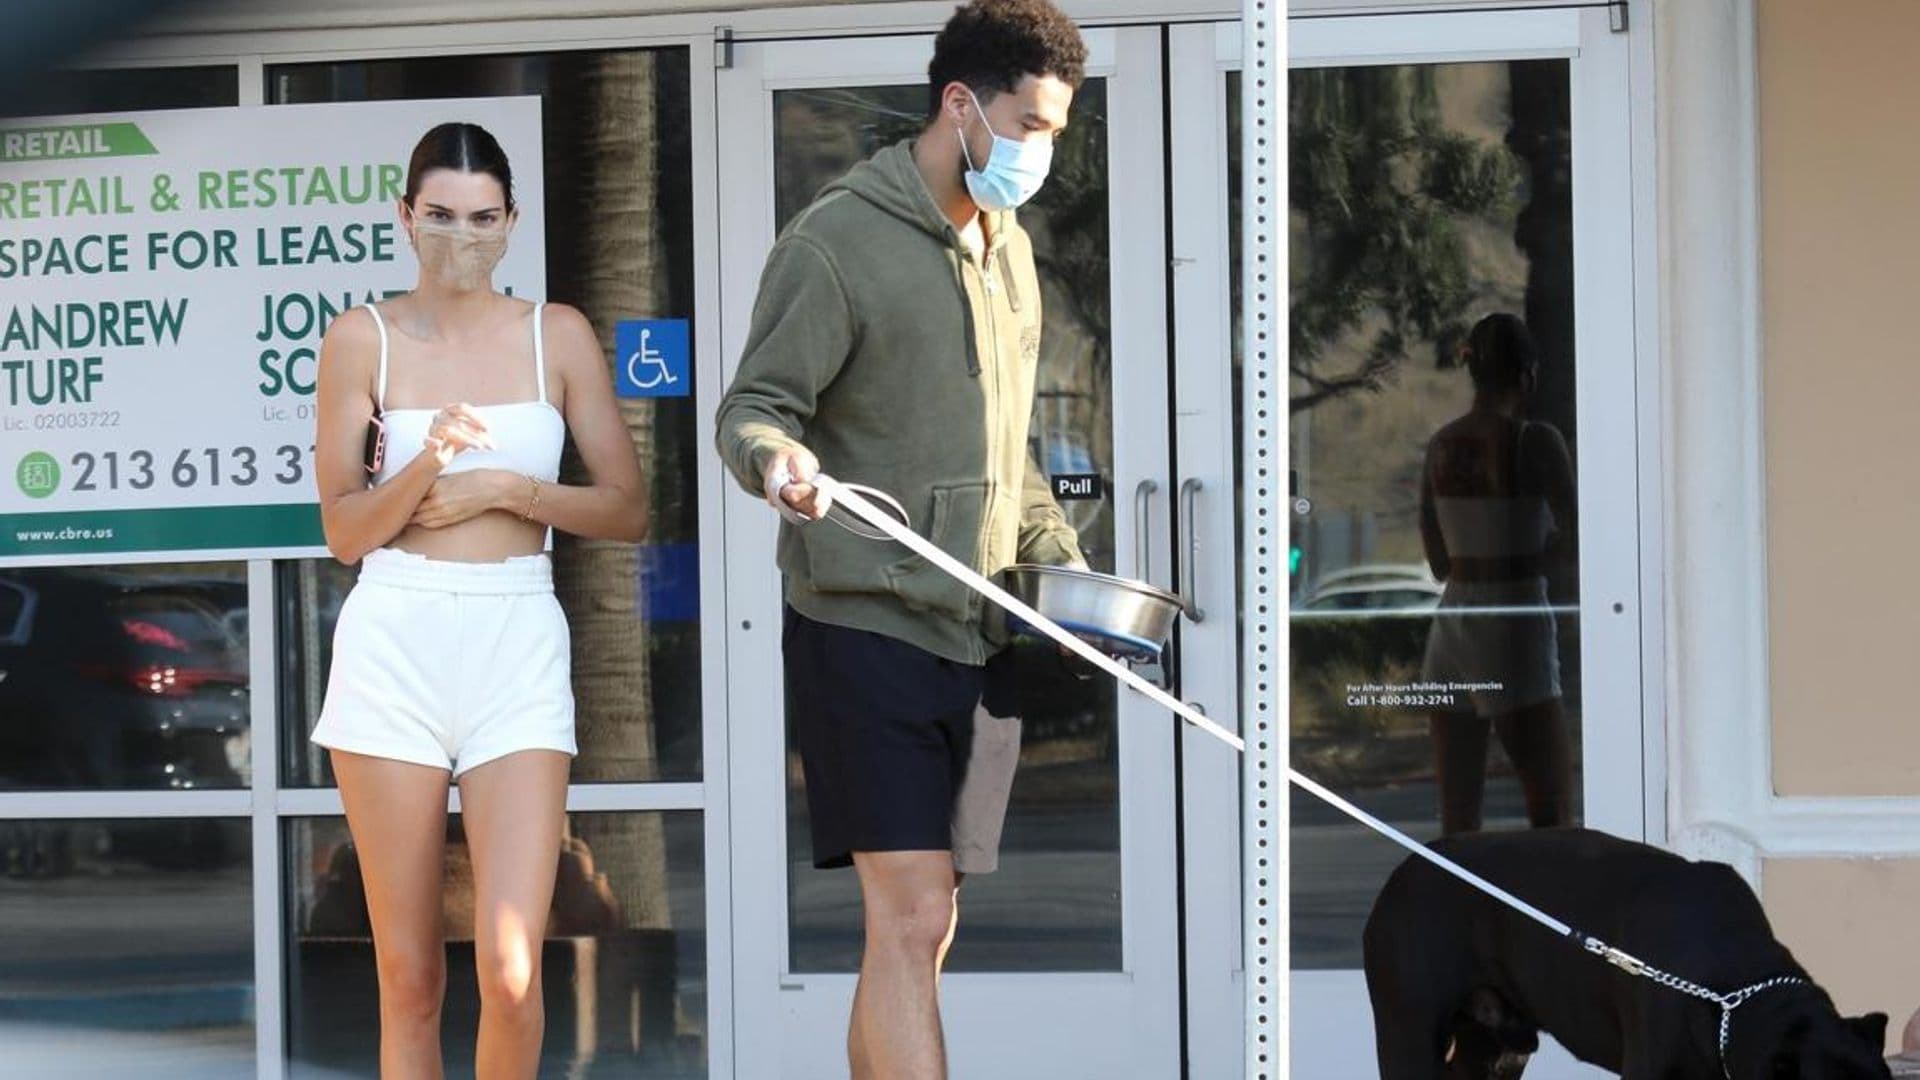 The Romance Continues Between Kendall Jenner and Devin Booker (Exclusive photos)